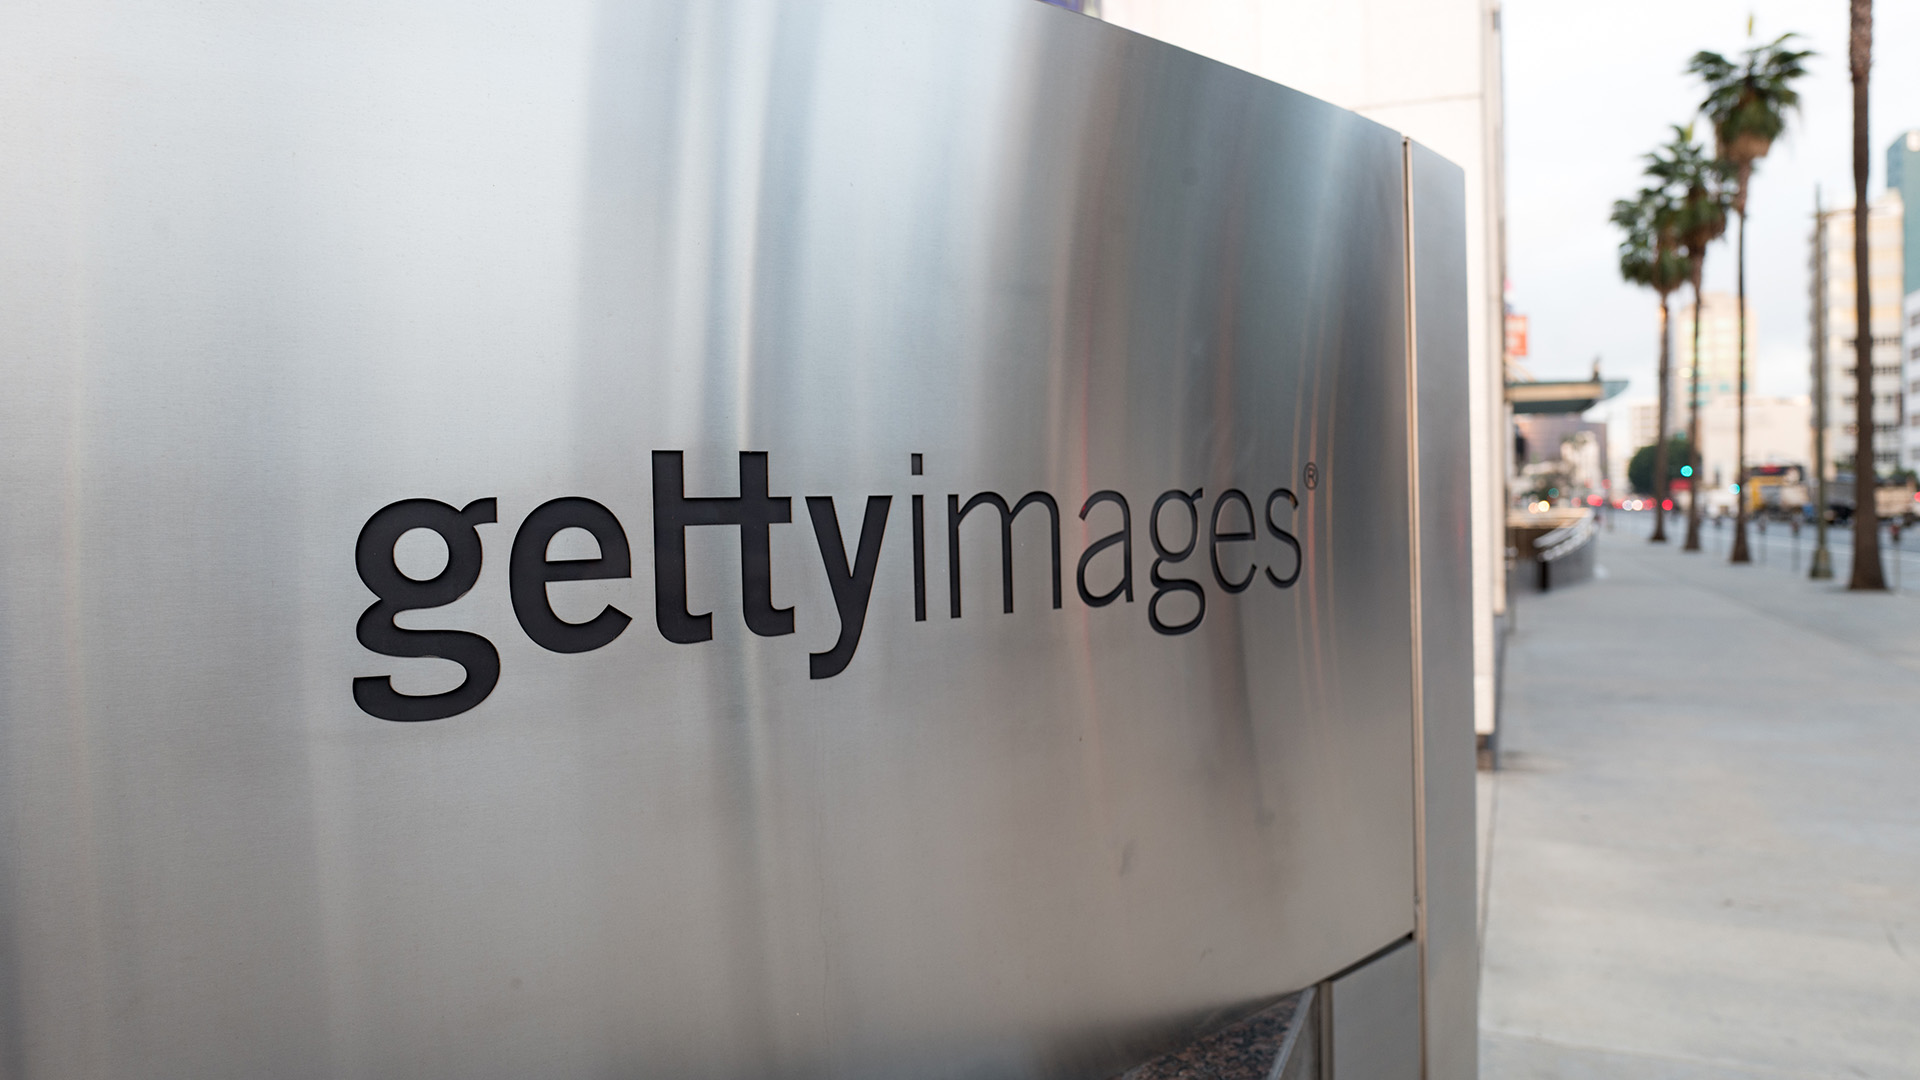  Getty Images files suit against one of the biggest AI art tools 